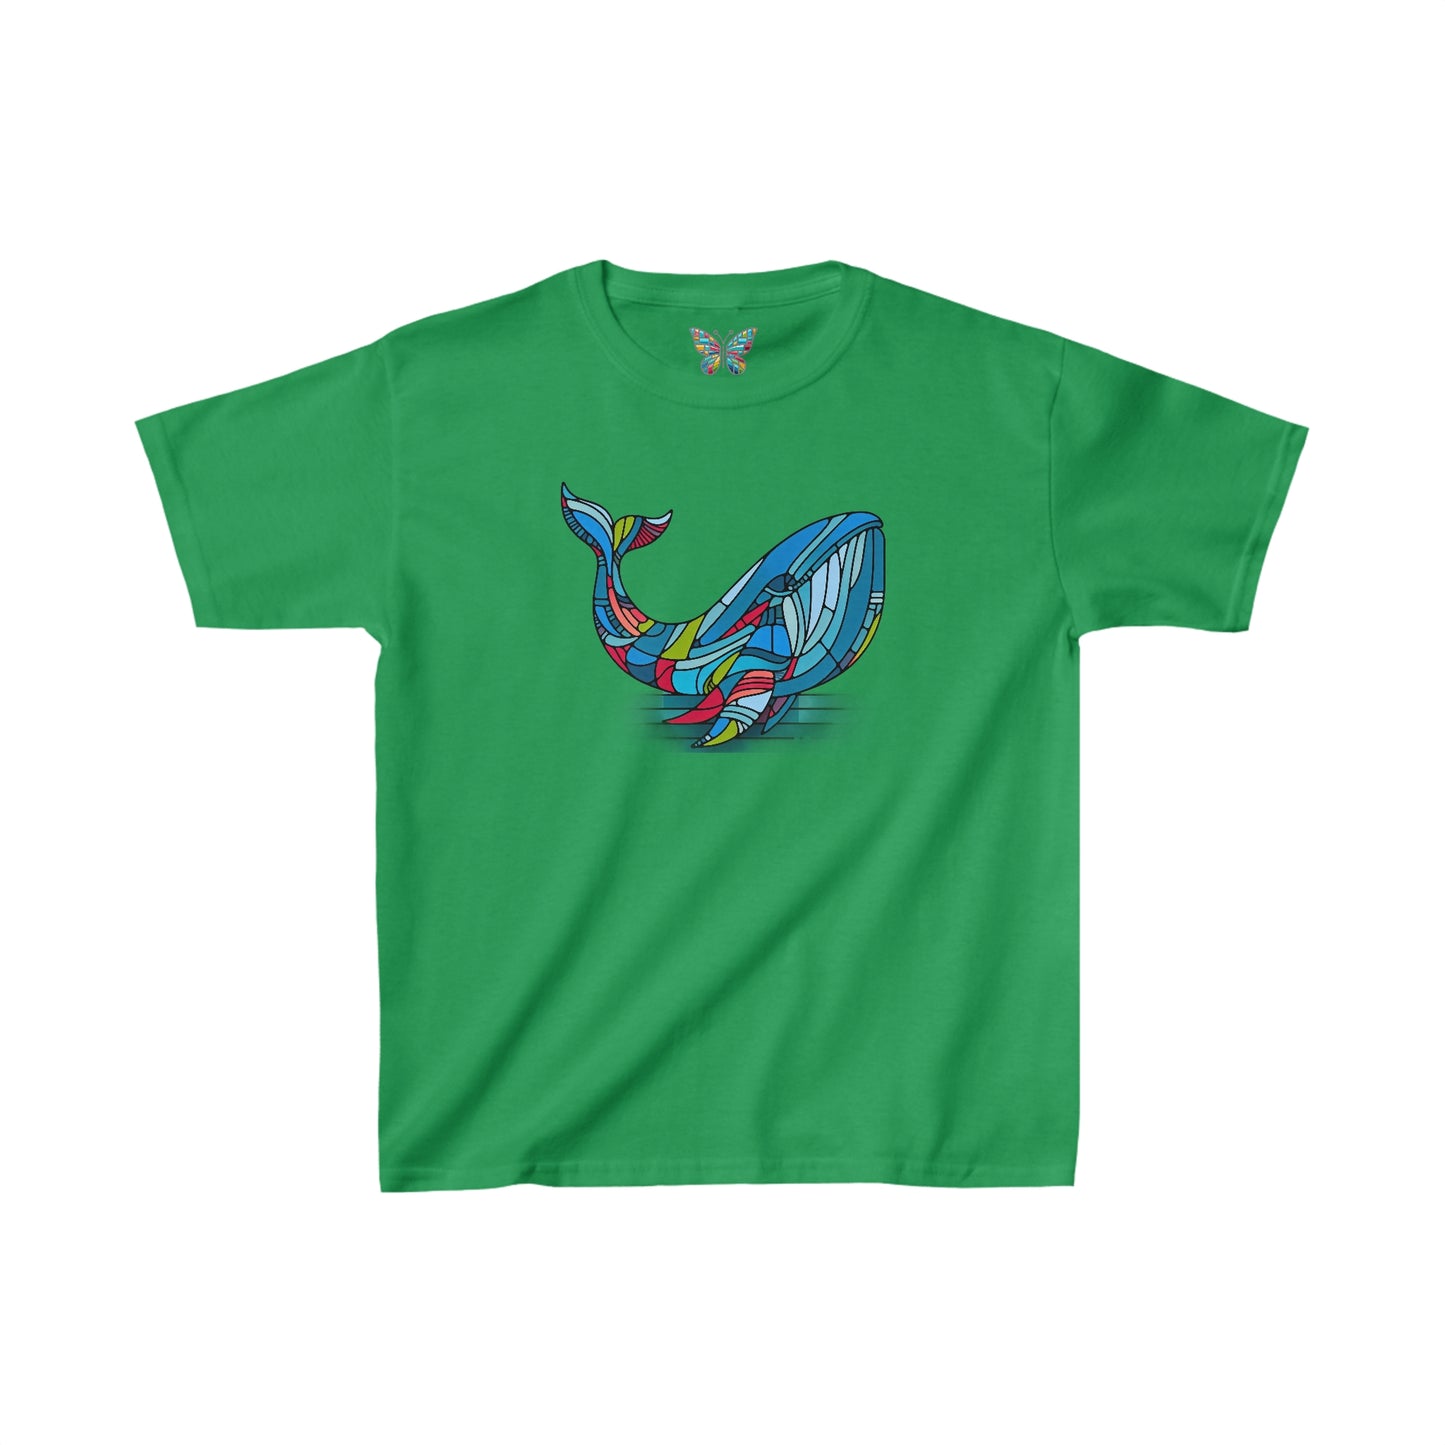 Blue Whale Plenjoyance - Youth - Snazzle Tee